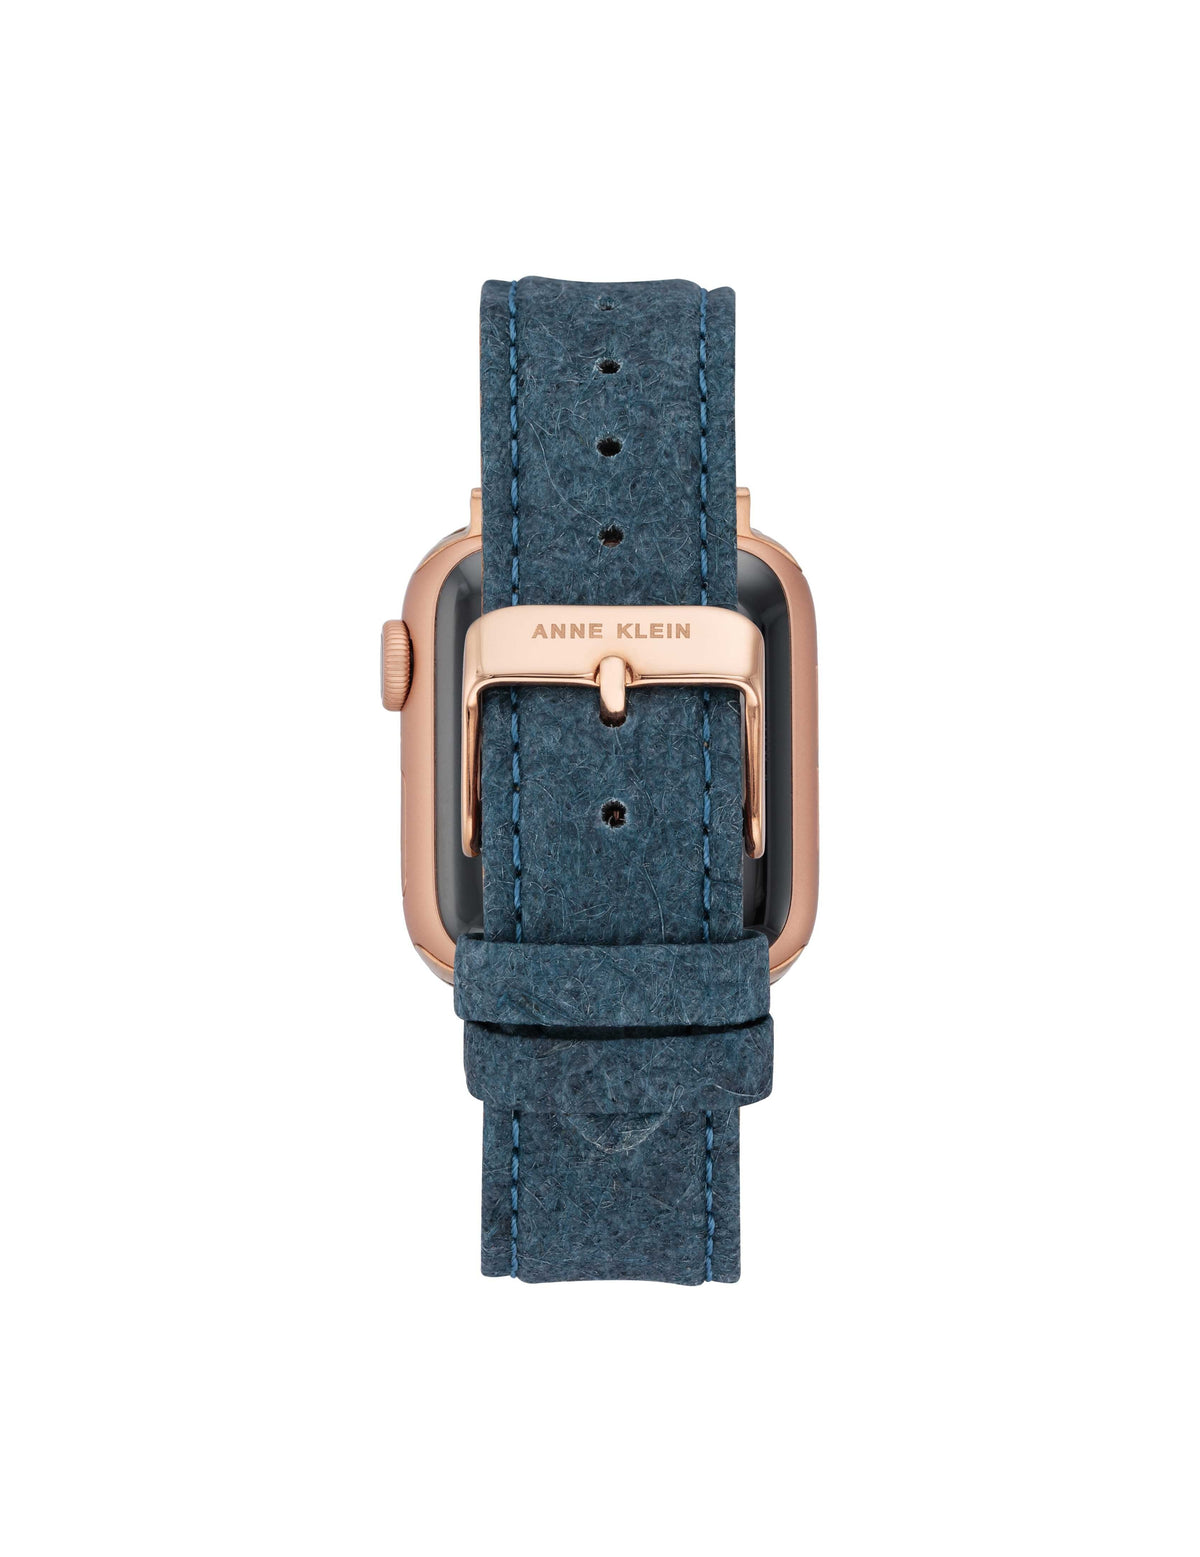 Anne Klein  Consider It Pineapple Leather Band for Apple Watch¨